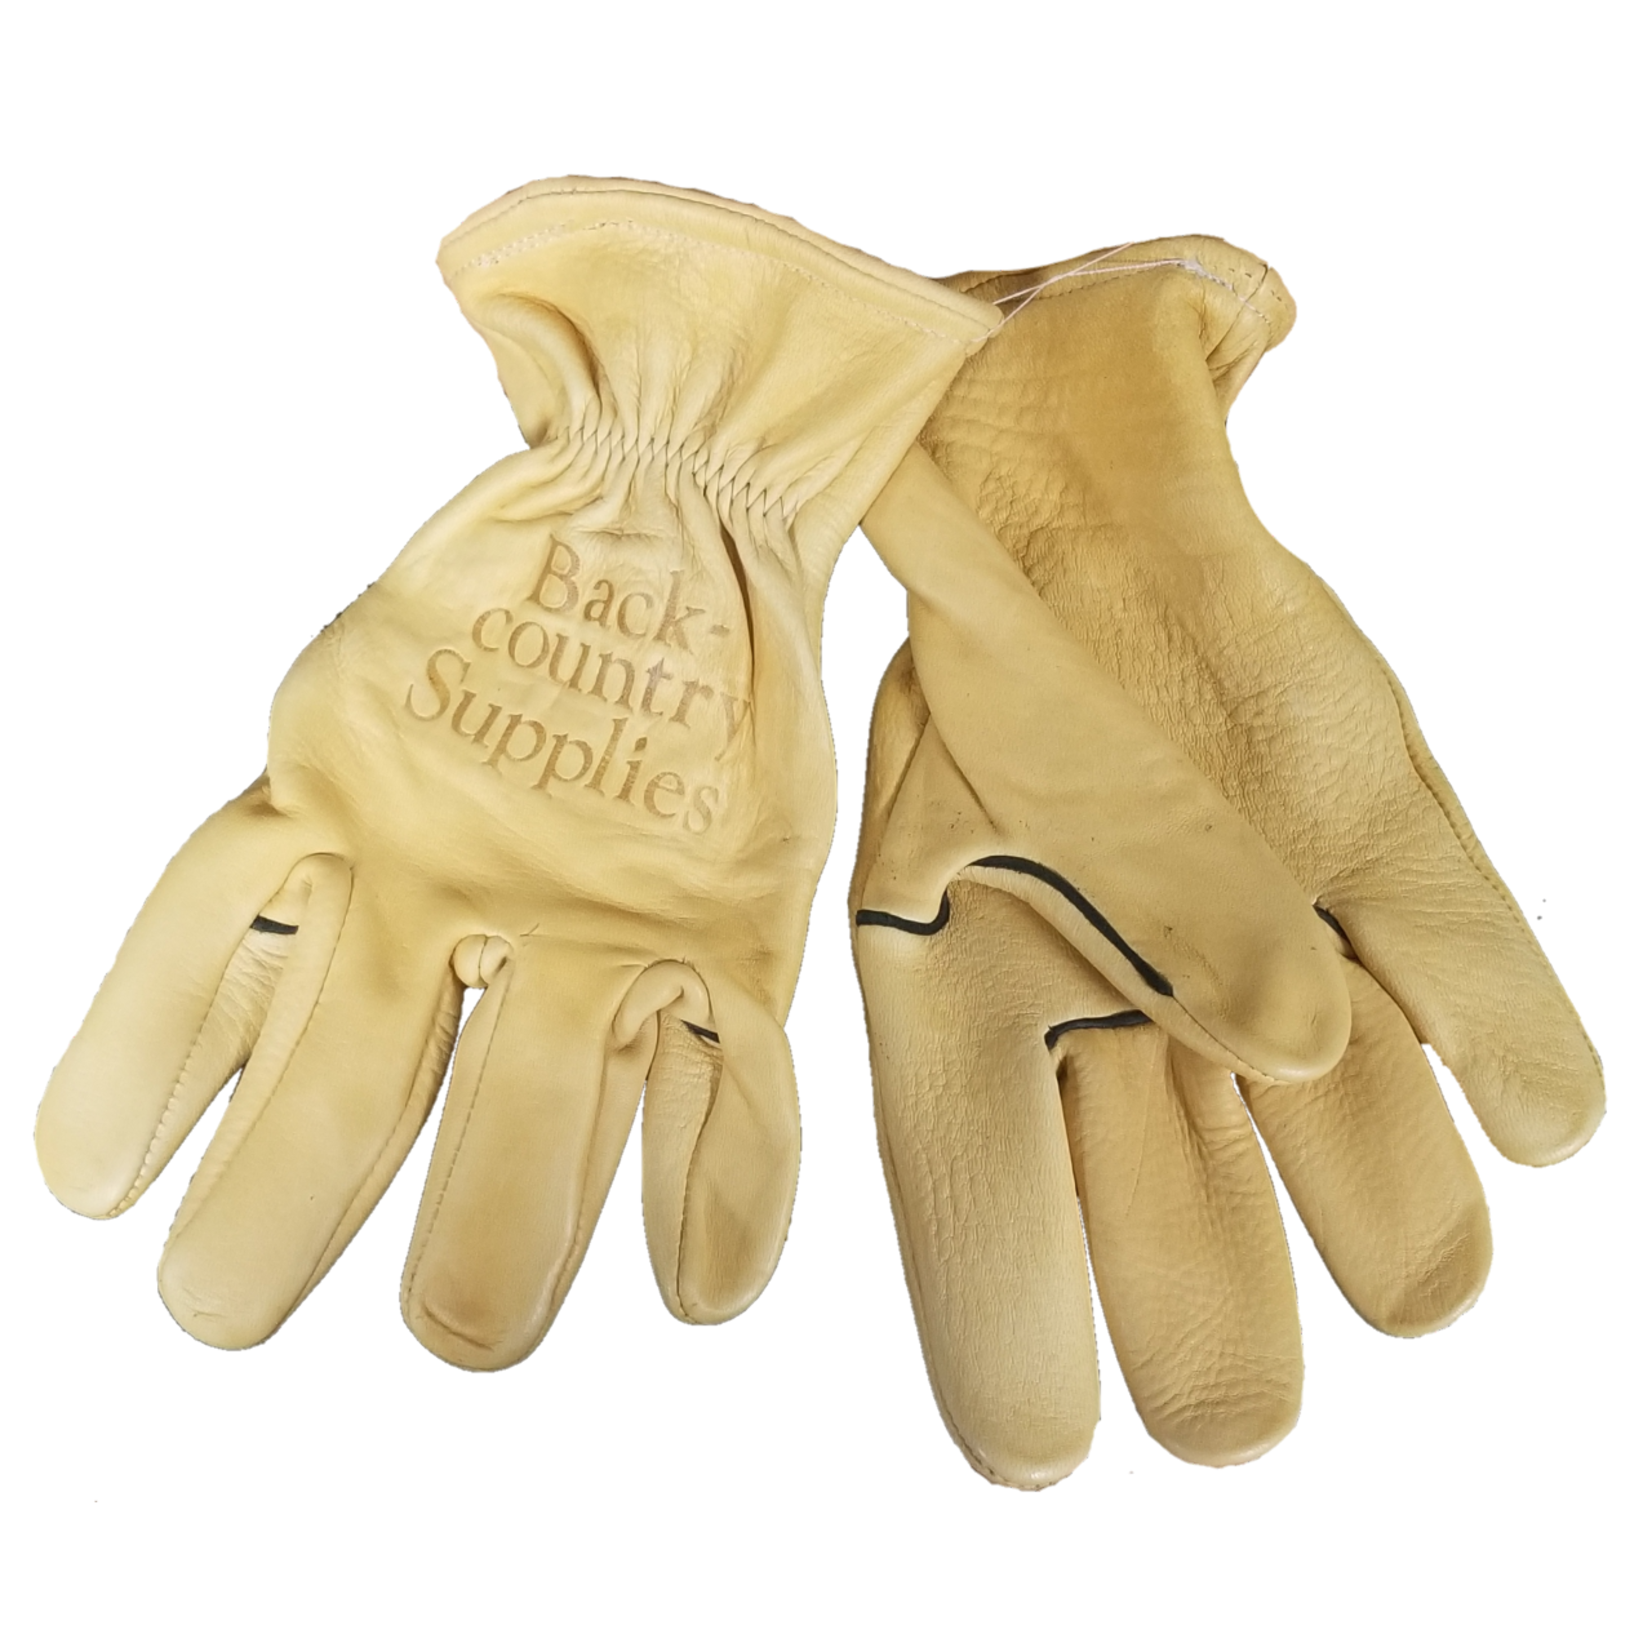 Backcountry Supplies Elk and deer leather gloves